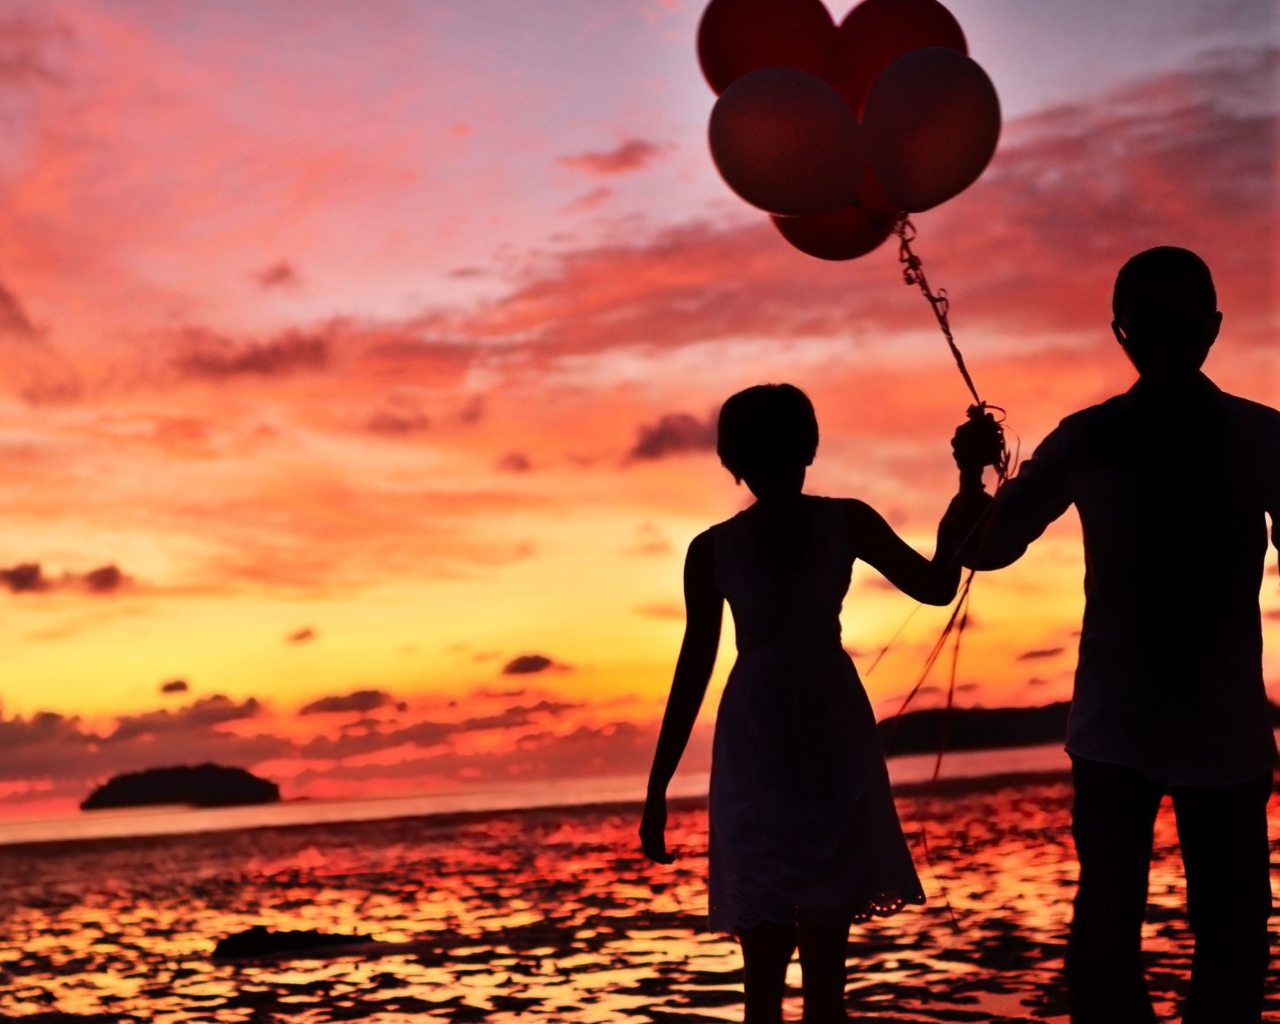 Couple With Balloons Silhouette At Sunset wallpaper 1280x1024